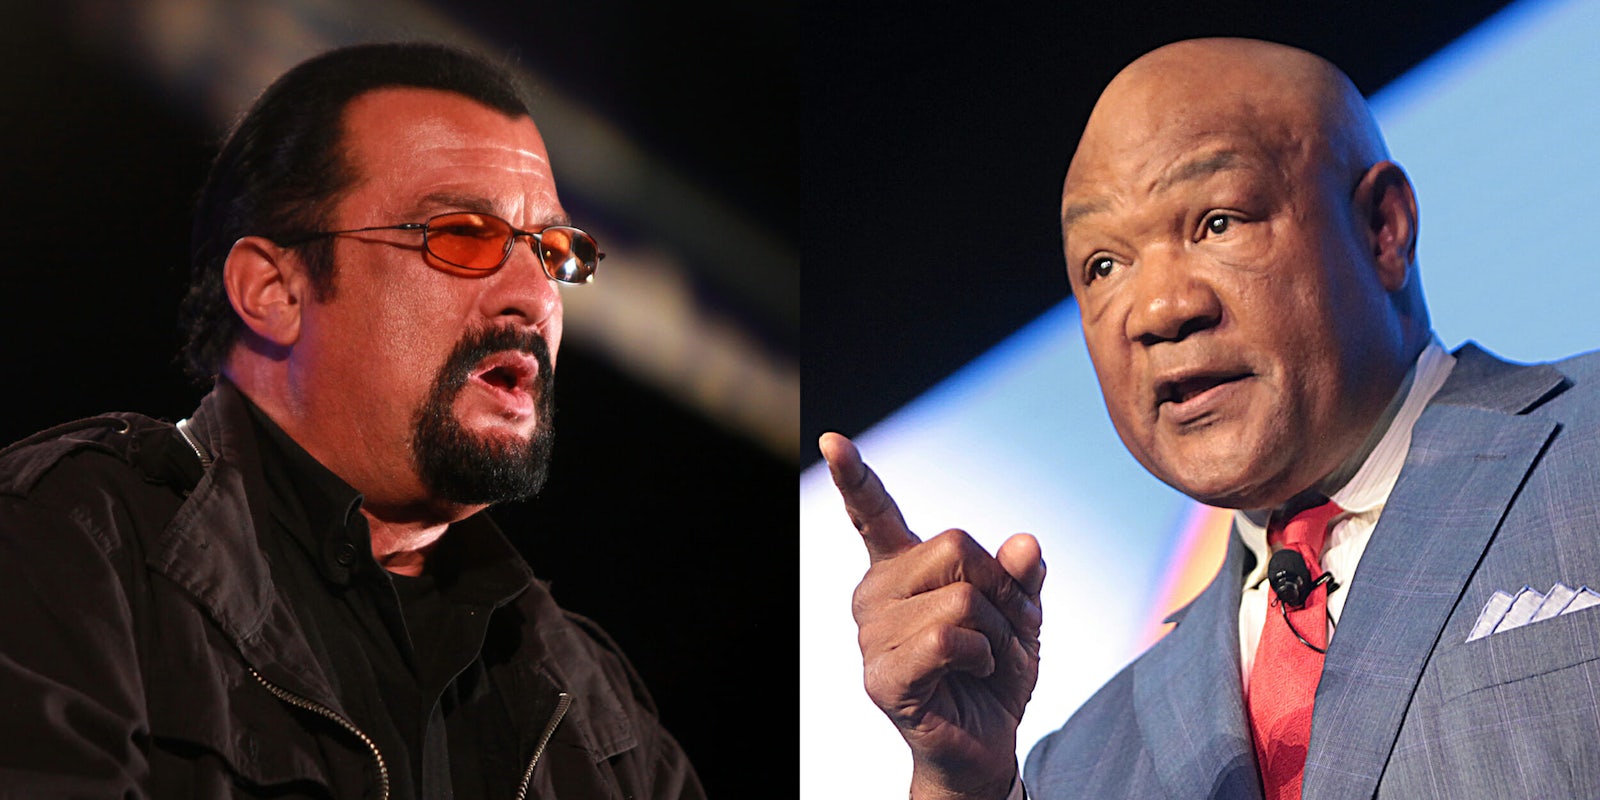 Steven Seagal and George Foreman